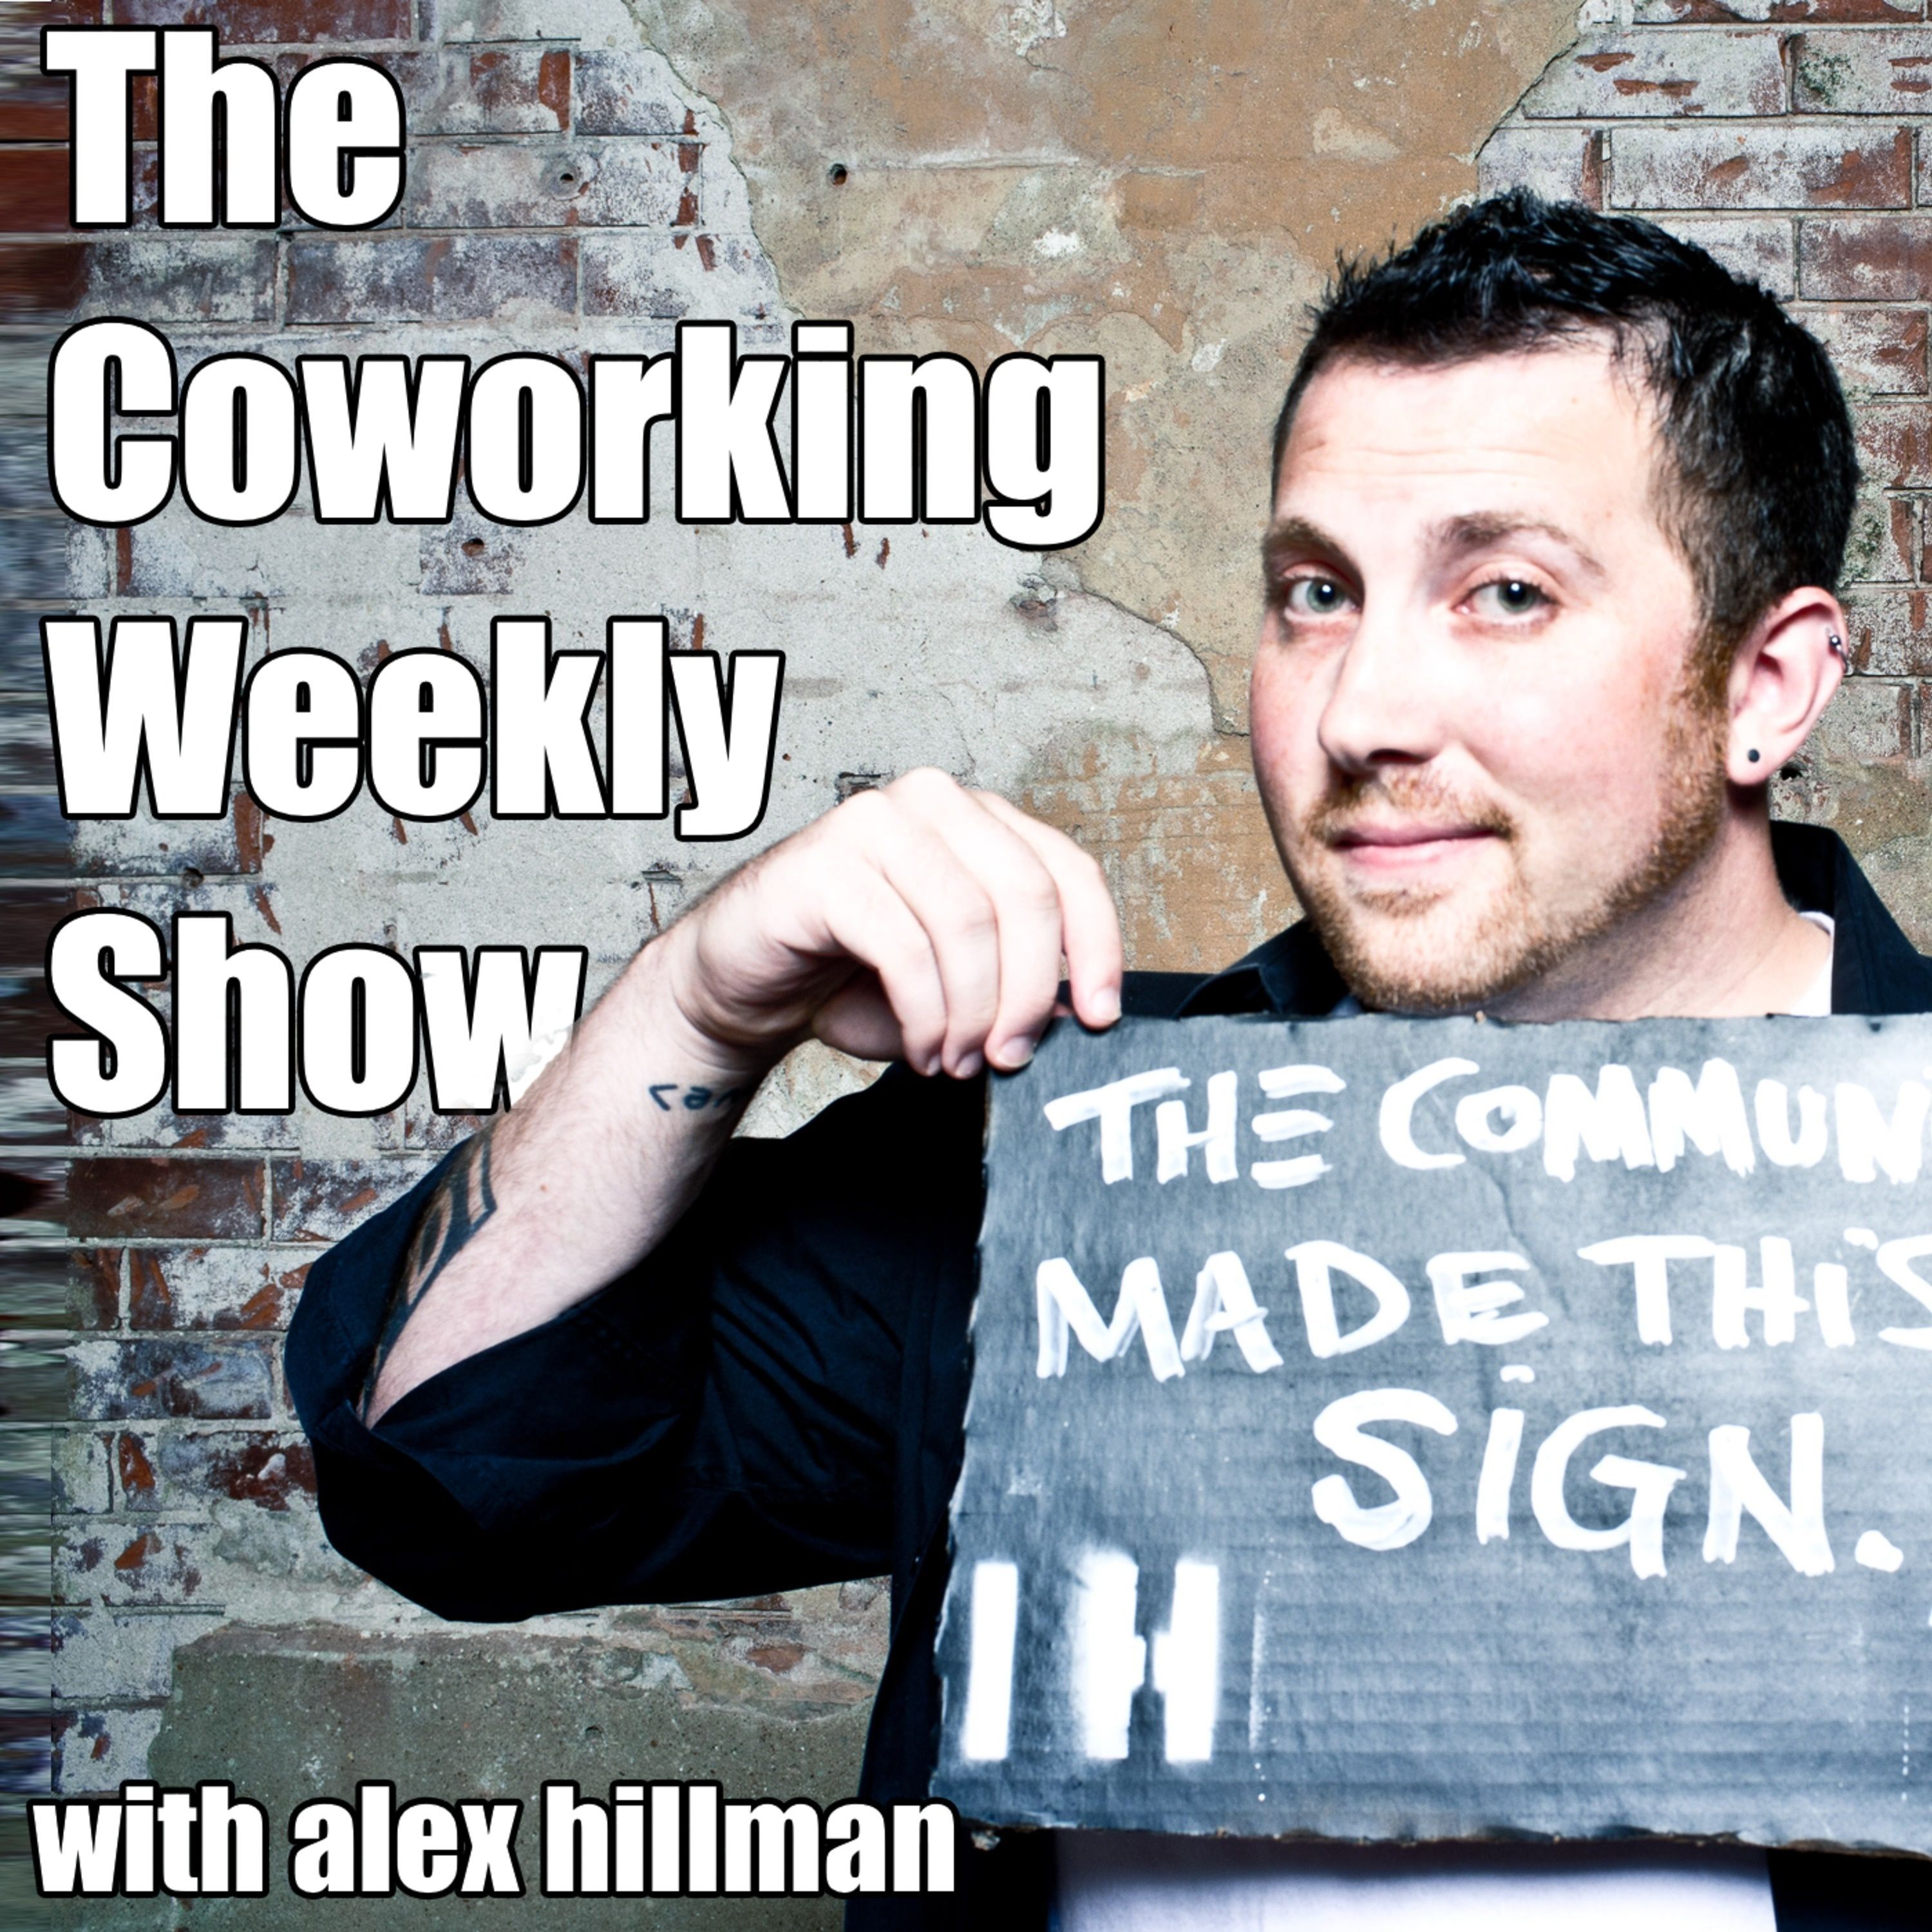 EP54 - A better security system for your coworking space